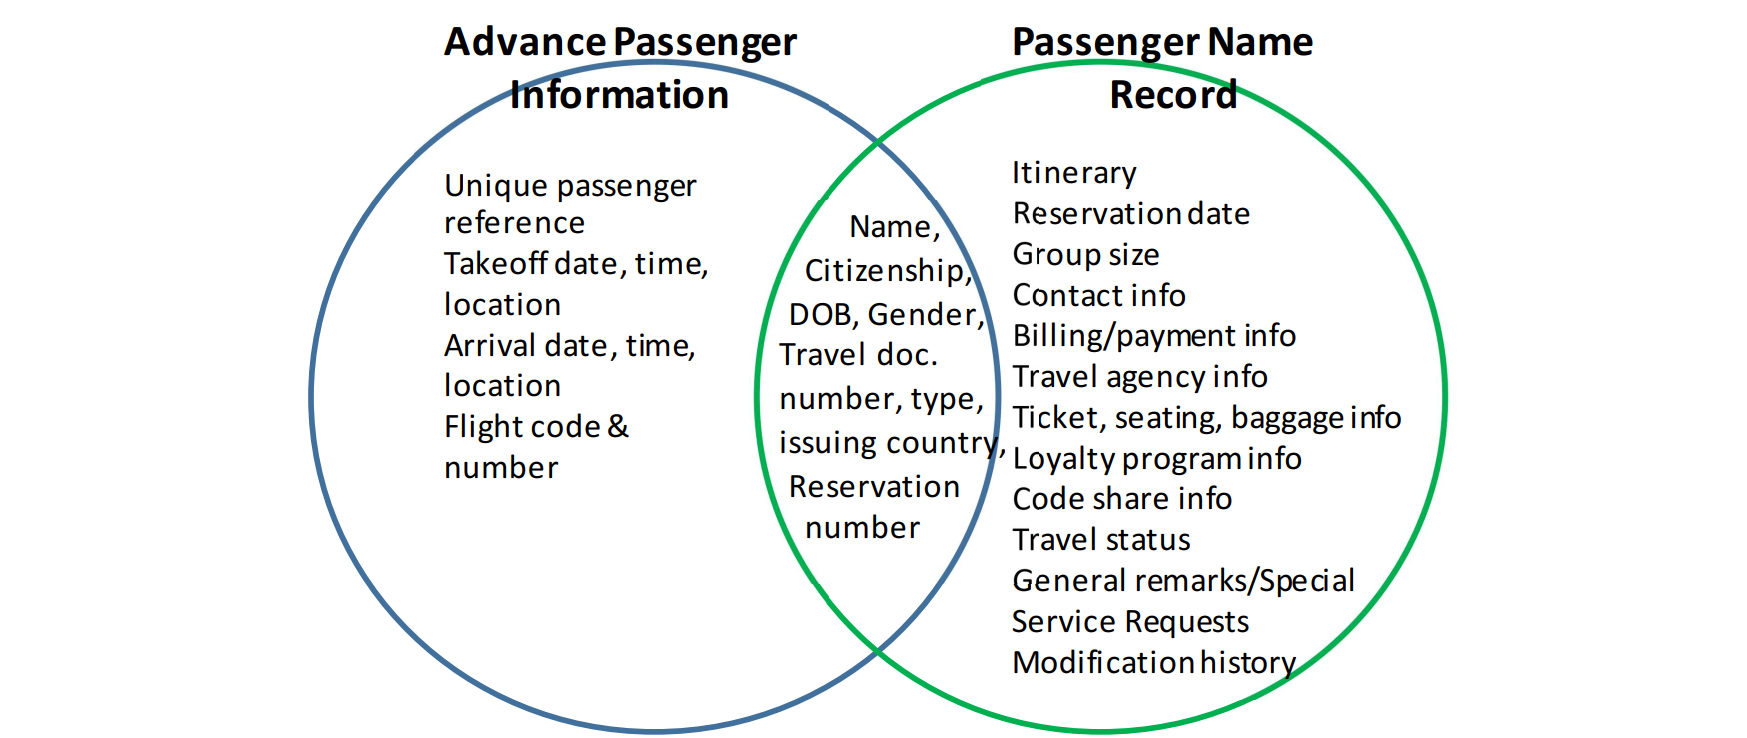 Figure 1: Advance Passenger Information and Passenger Name Record Elements Graphic